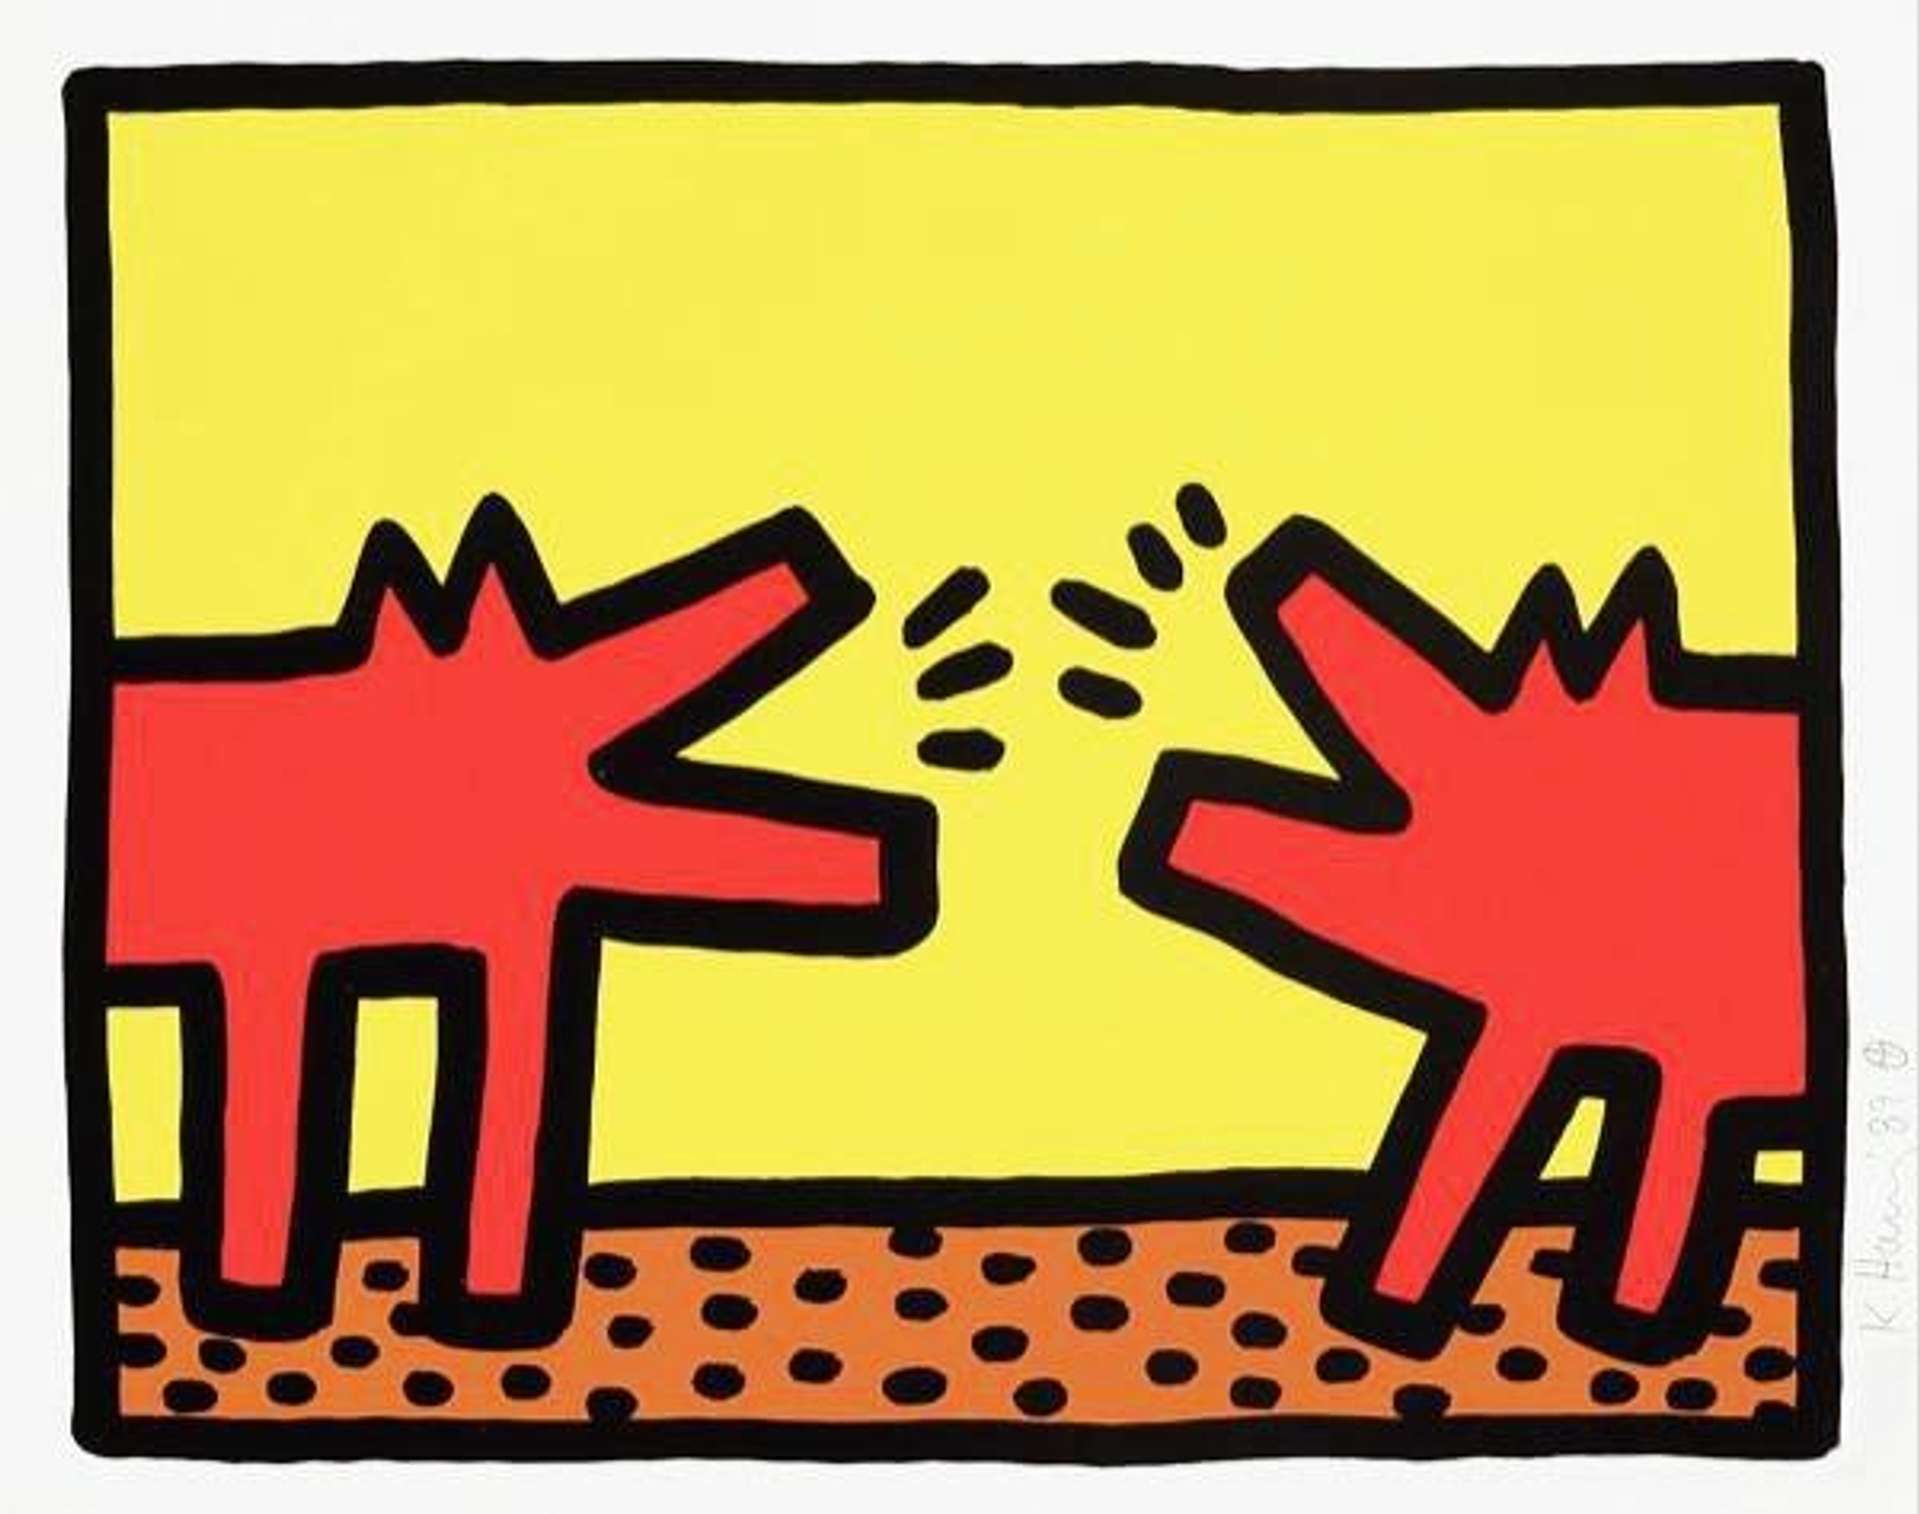 Pop Shop IV, Plate IV by Keith Haring. The print features two simplified red dogs barking against a yellow background.